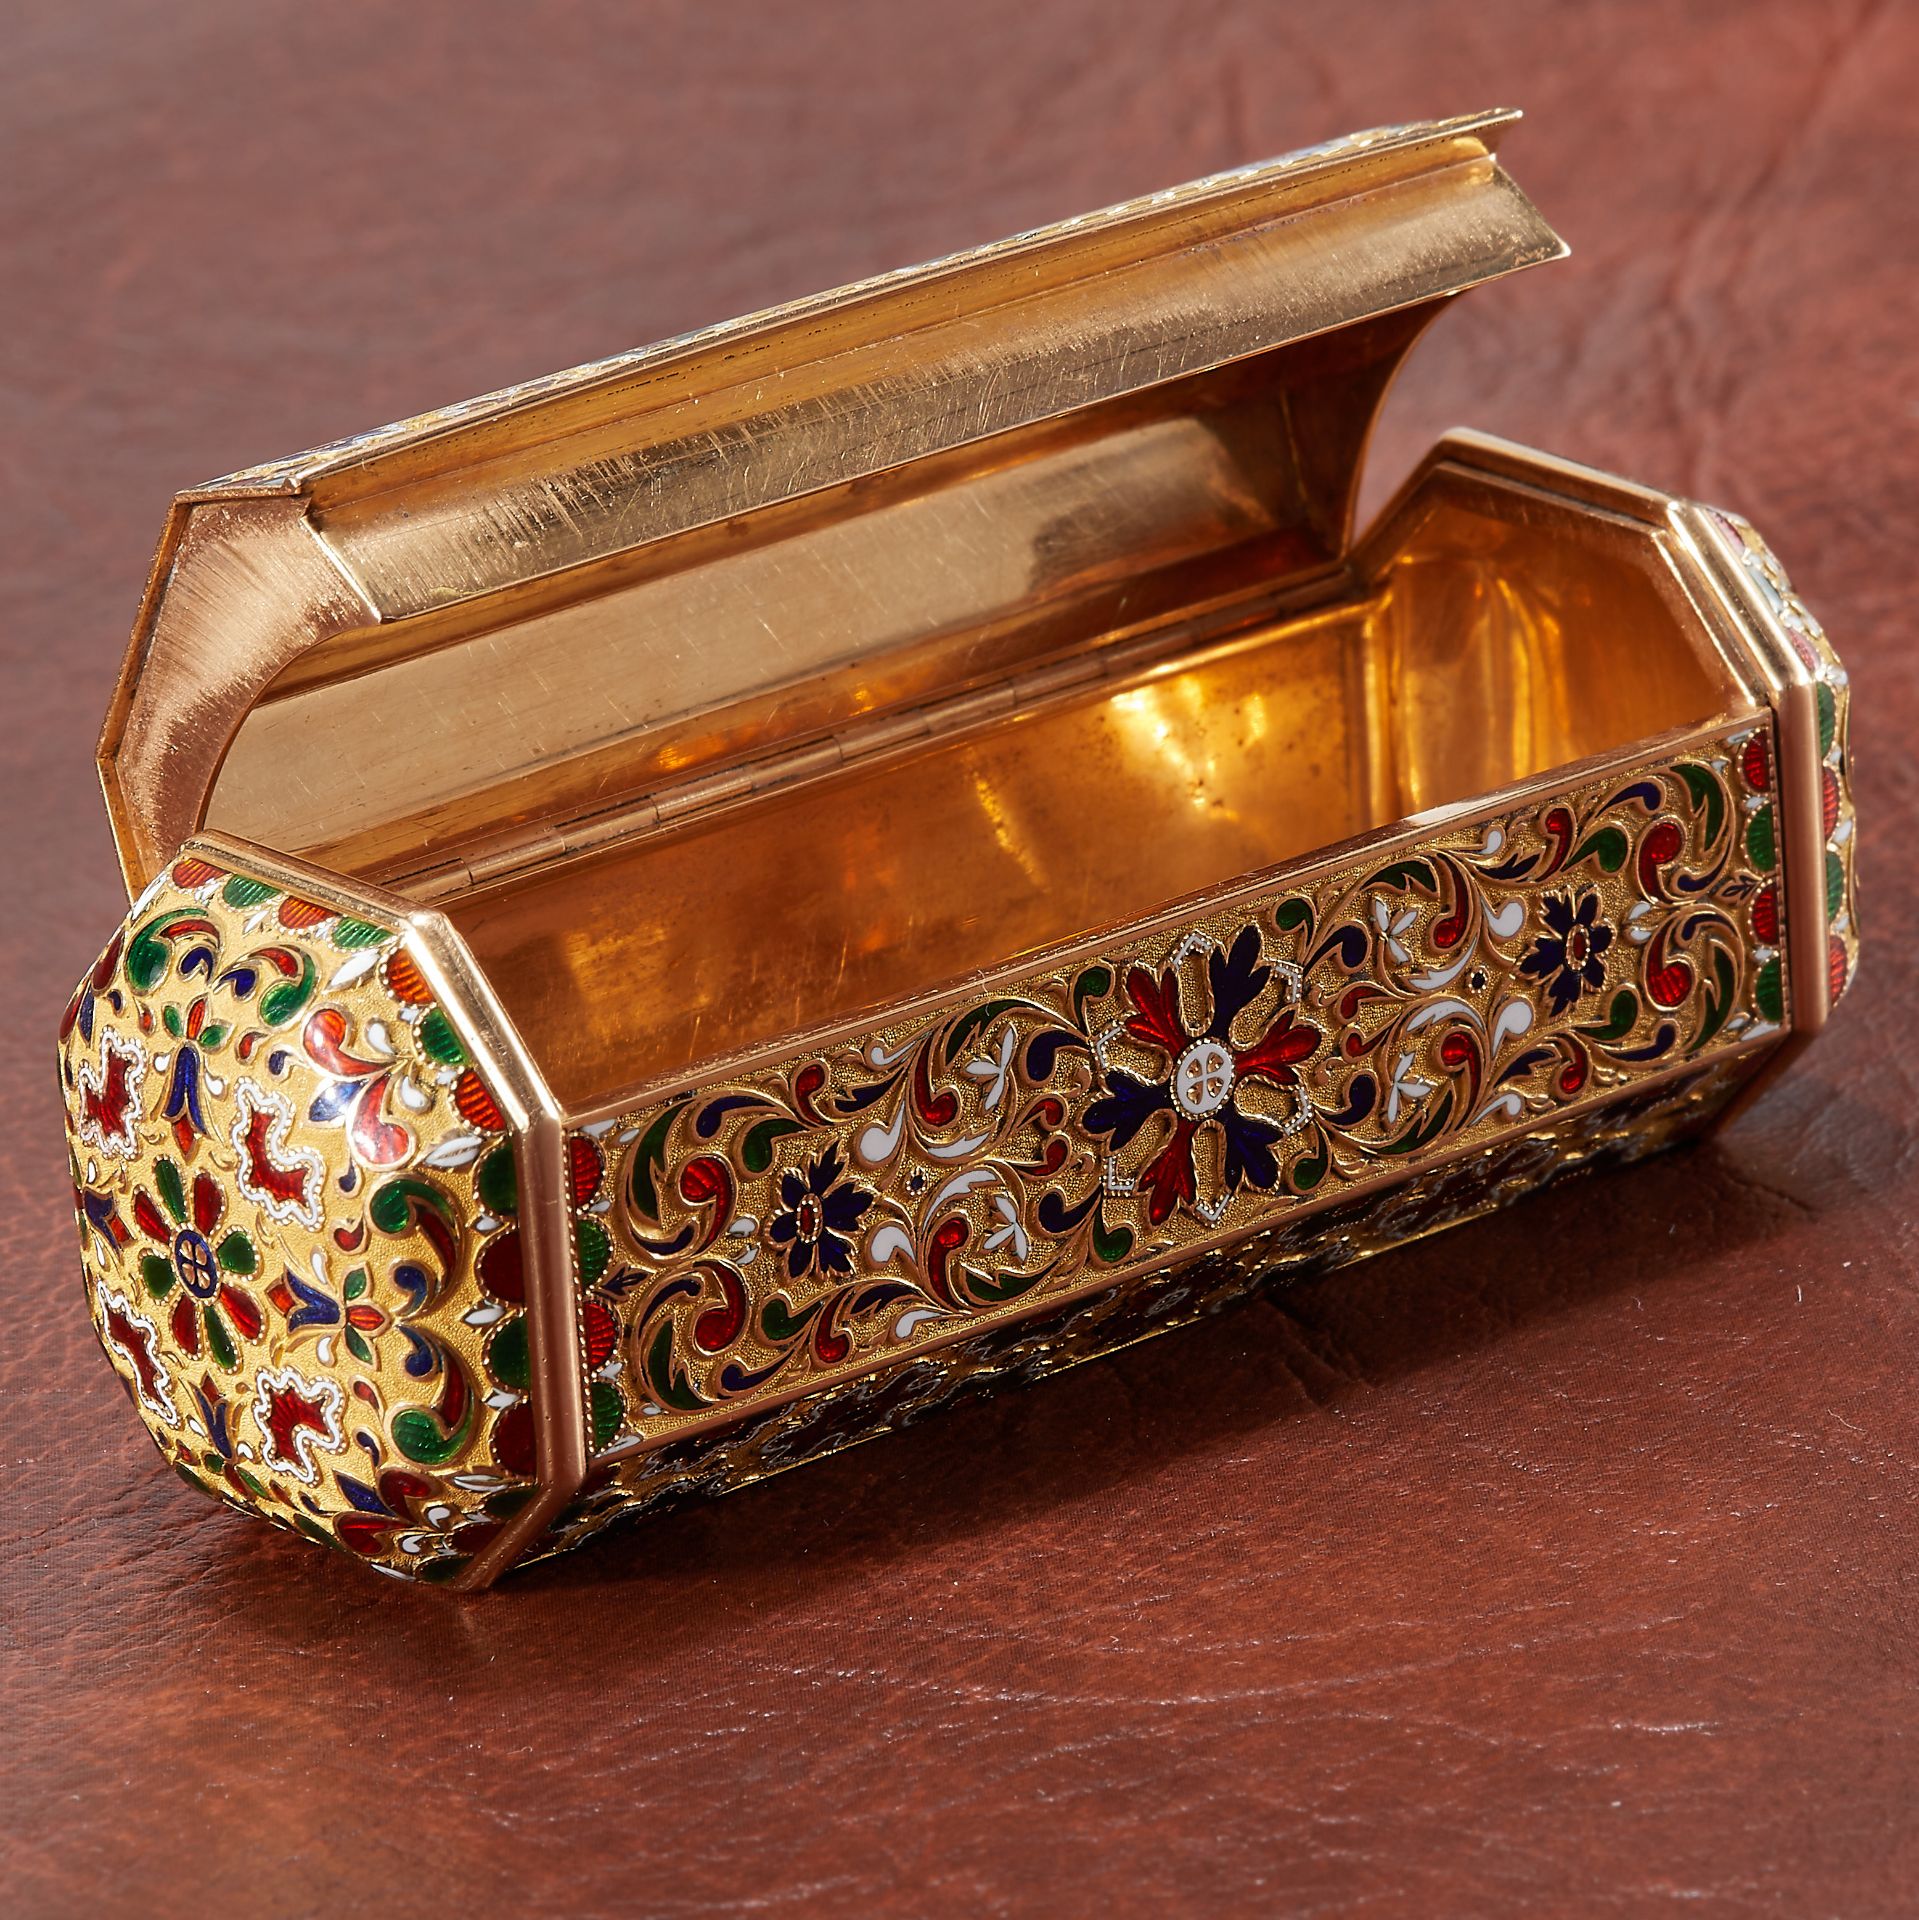 J.F BAUTTE & CIE, GENEVA. 1826-1837, A RARE AND FINE GOLD AND ENAMEL ELONGATED OCTAGONAL SNUFFBOX - Image 2 of 4